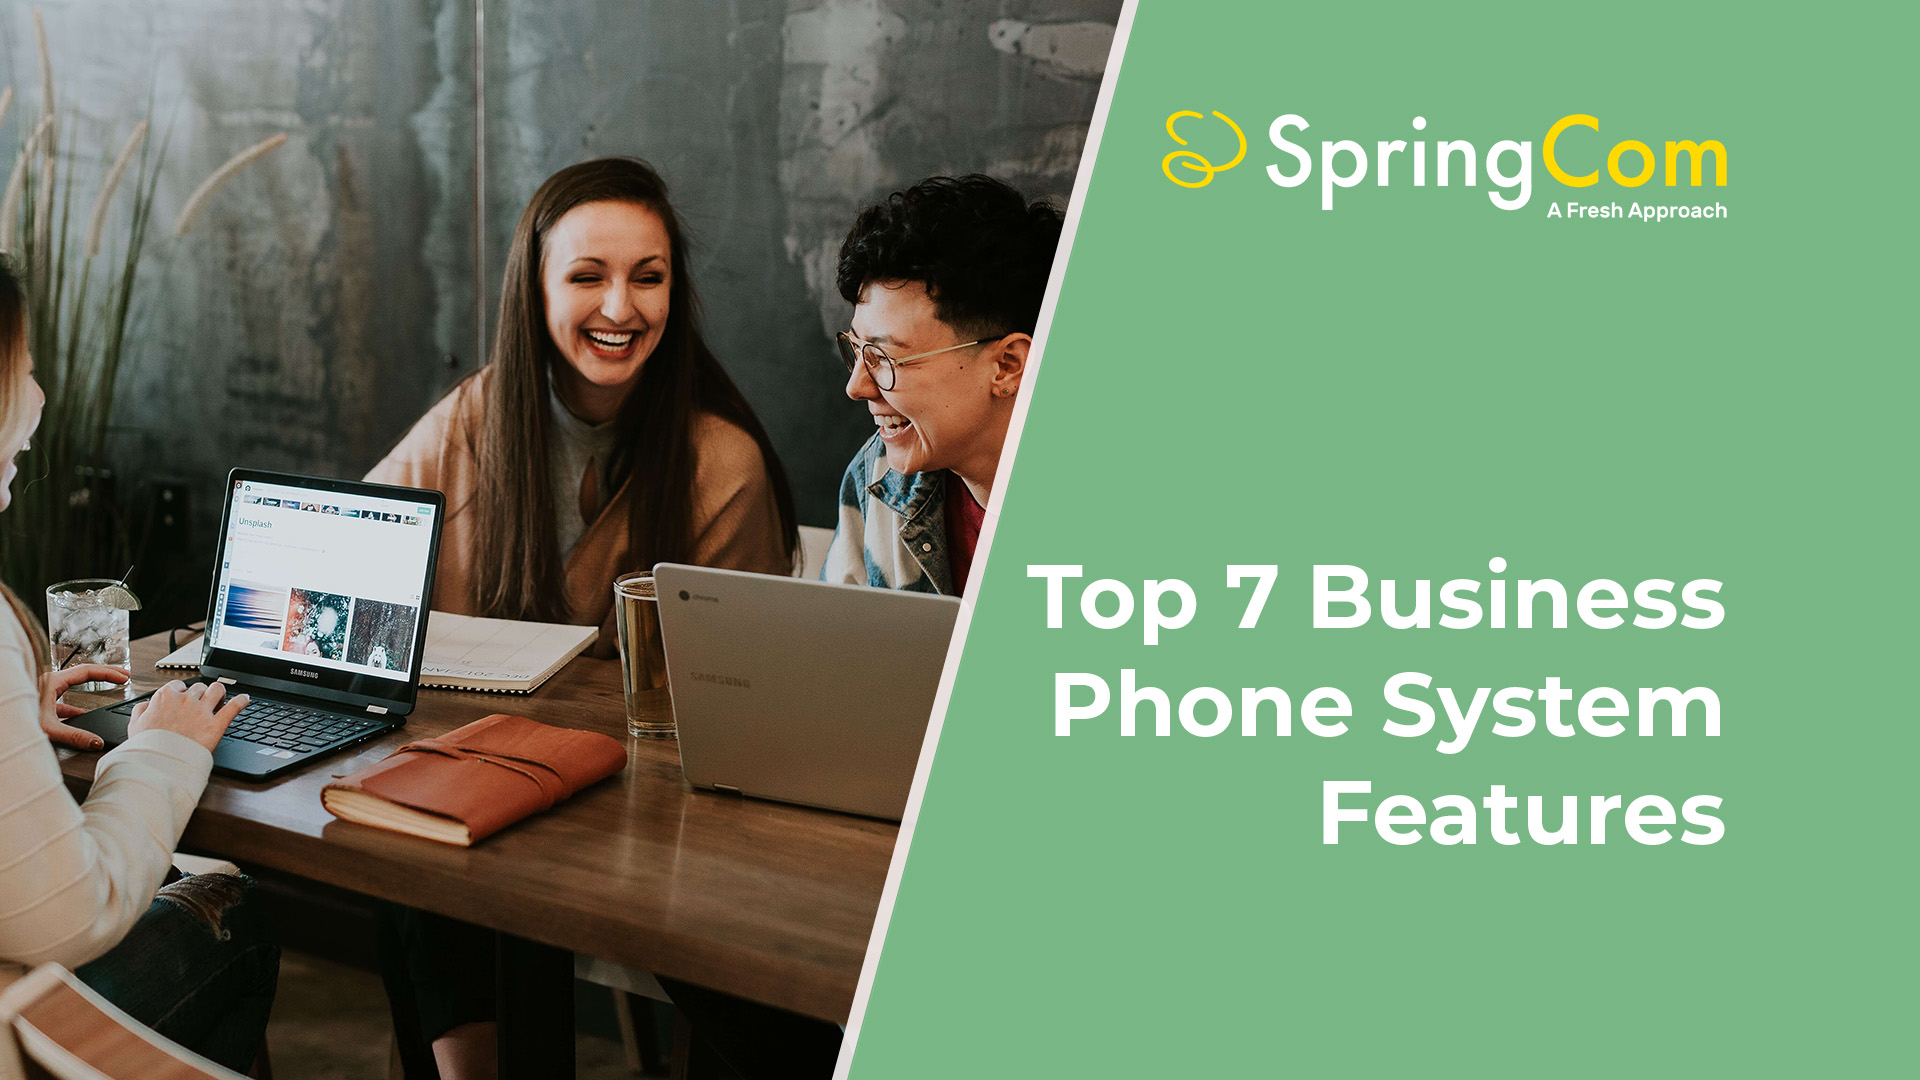 Top 7 Business Phone System Features